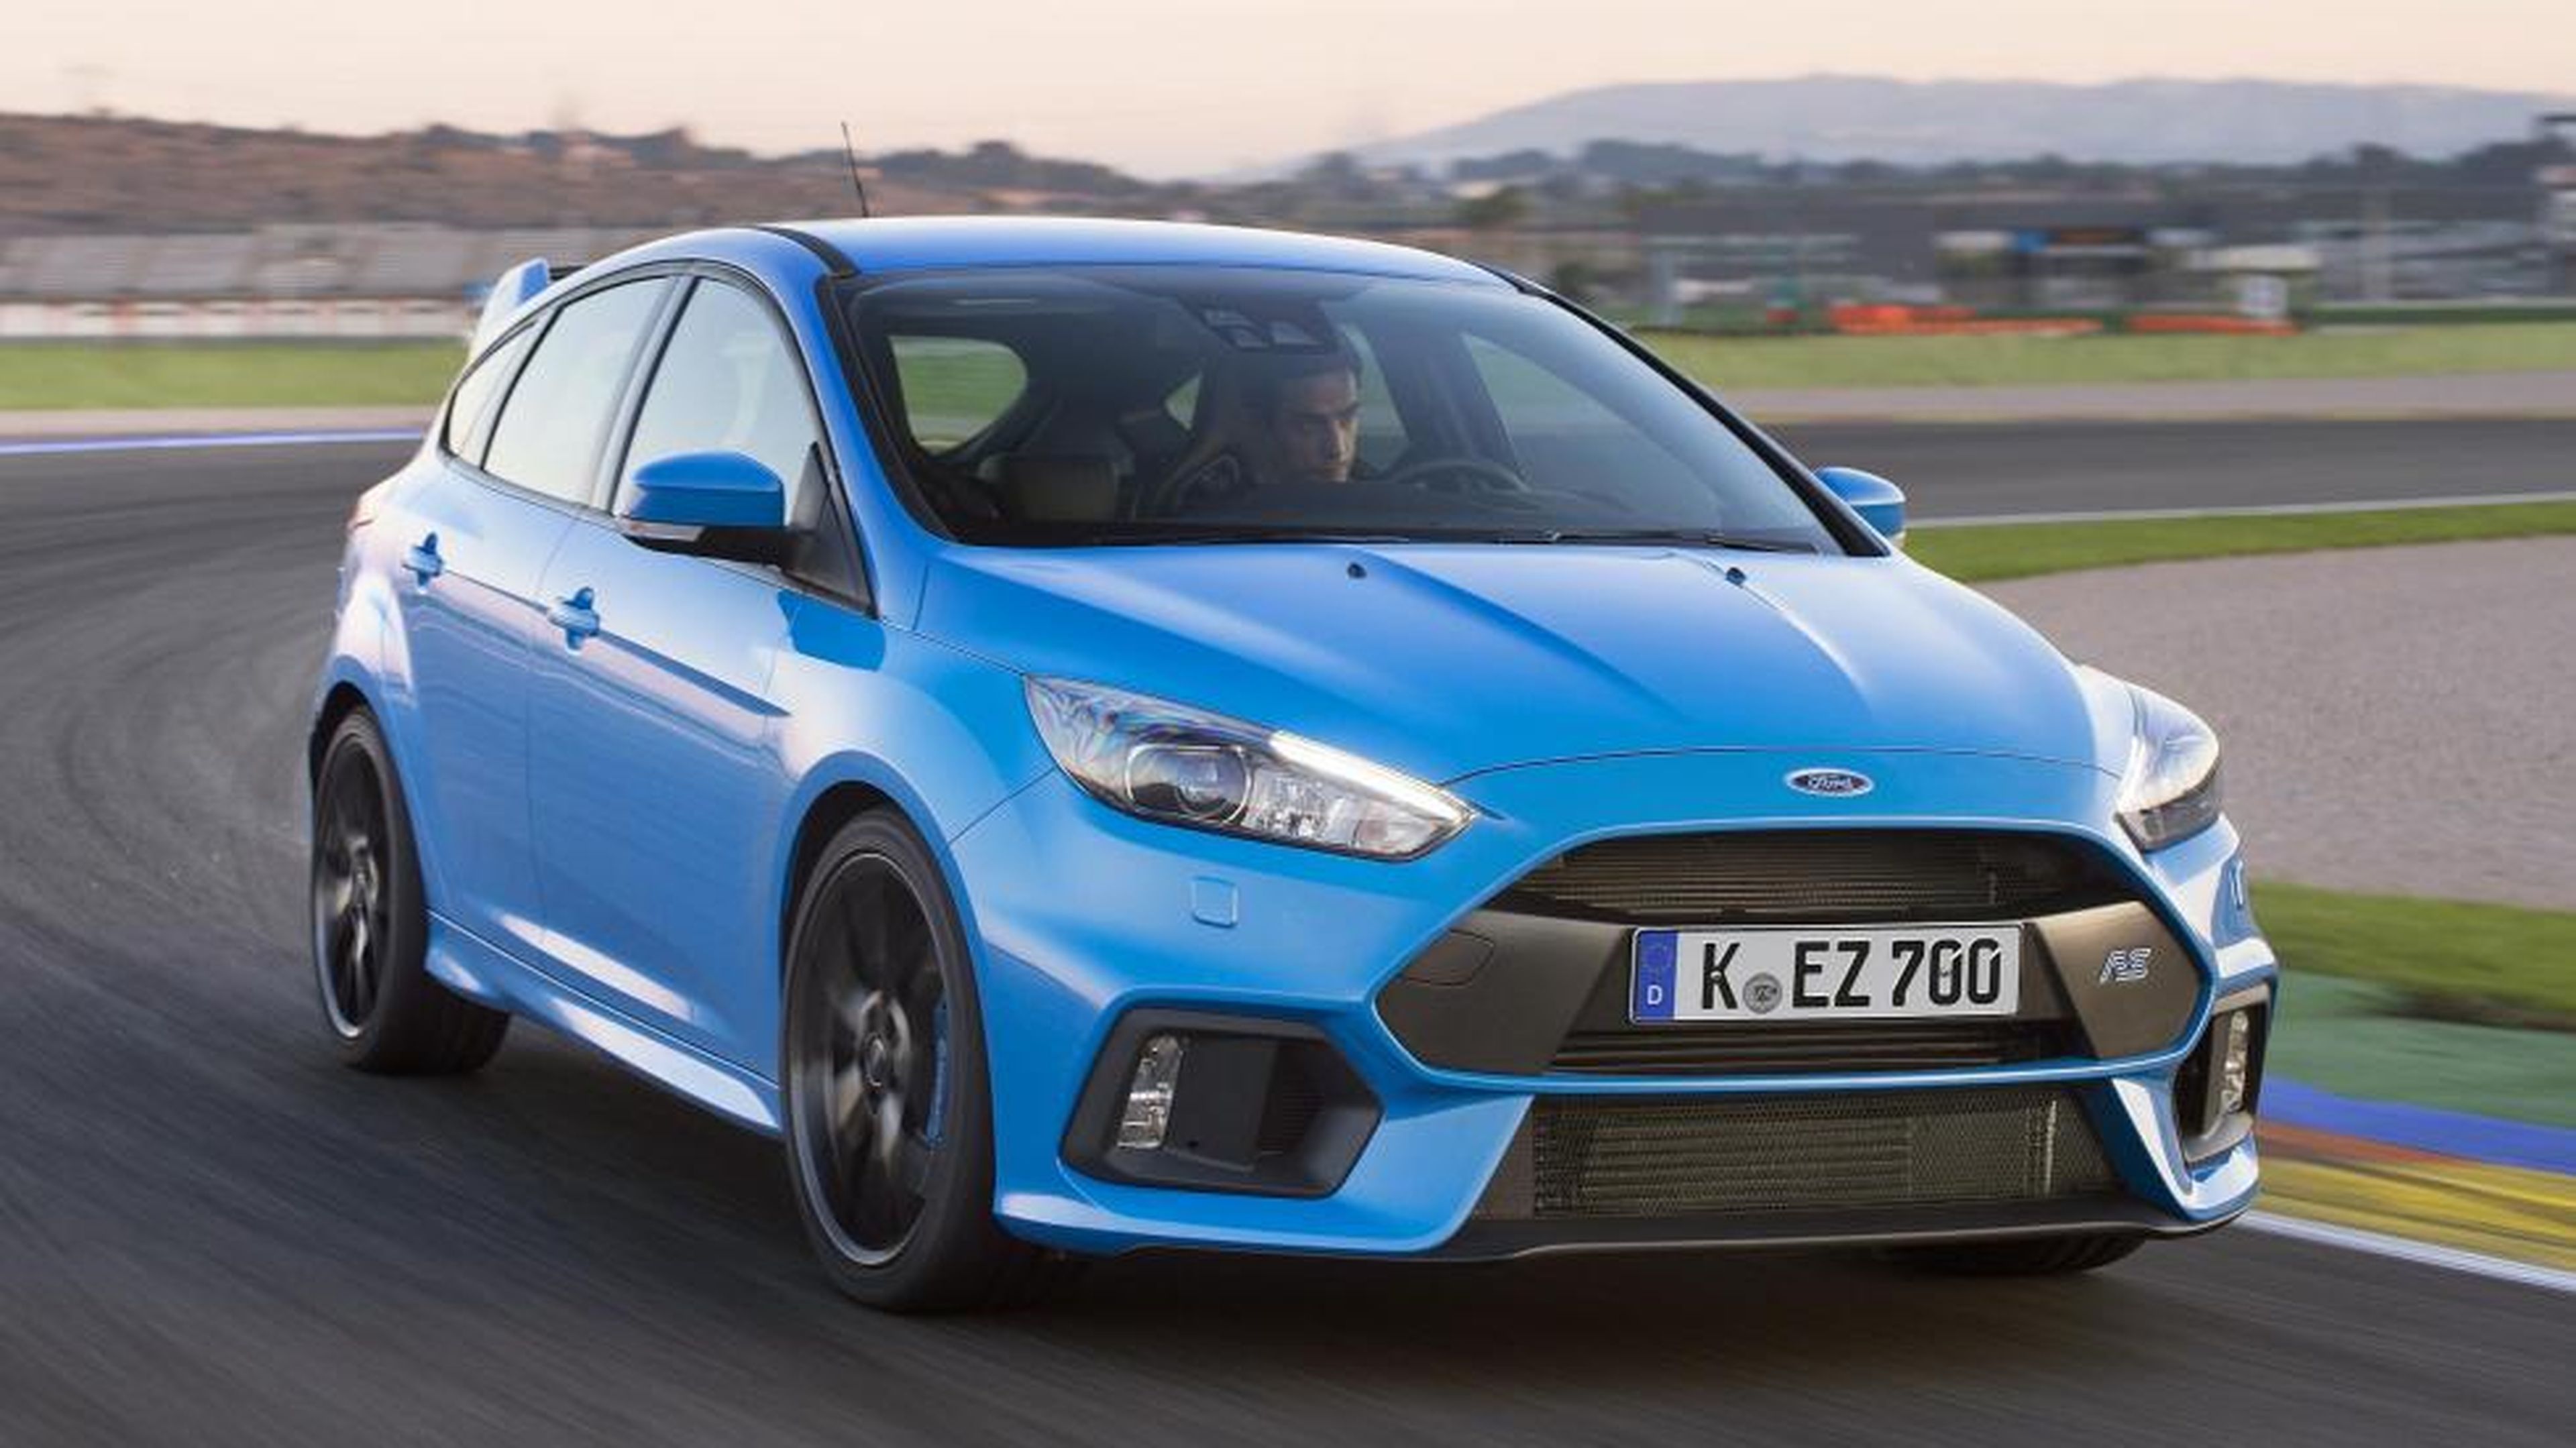 Coches que te ponen: Ford Focus RS (II)